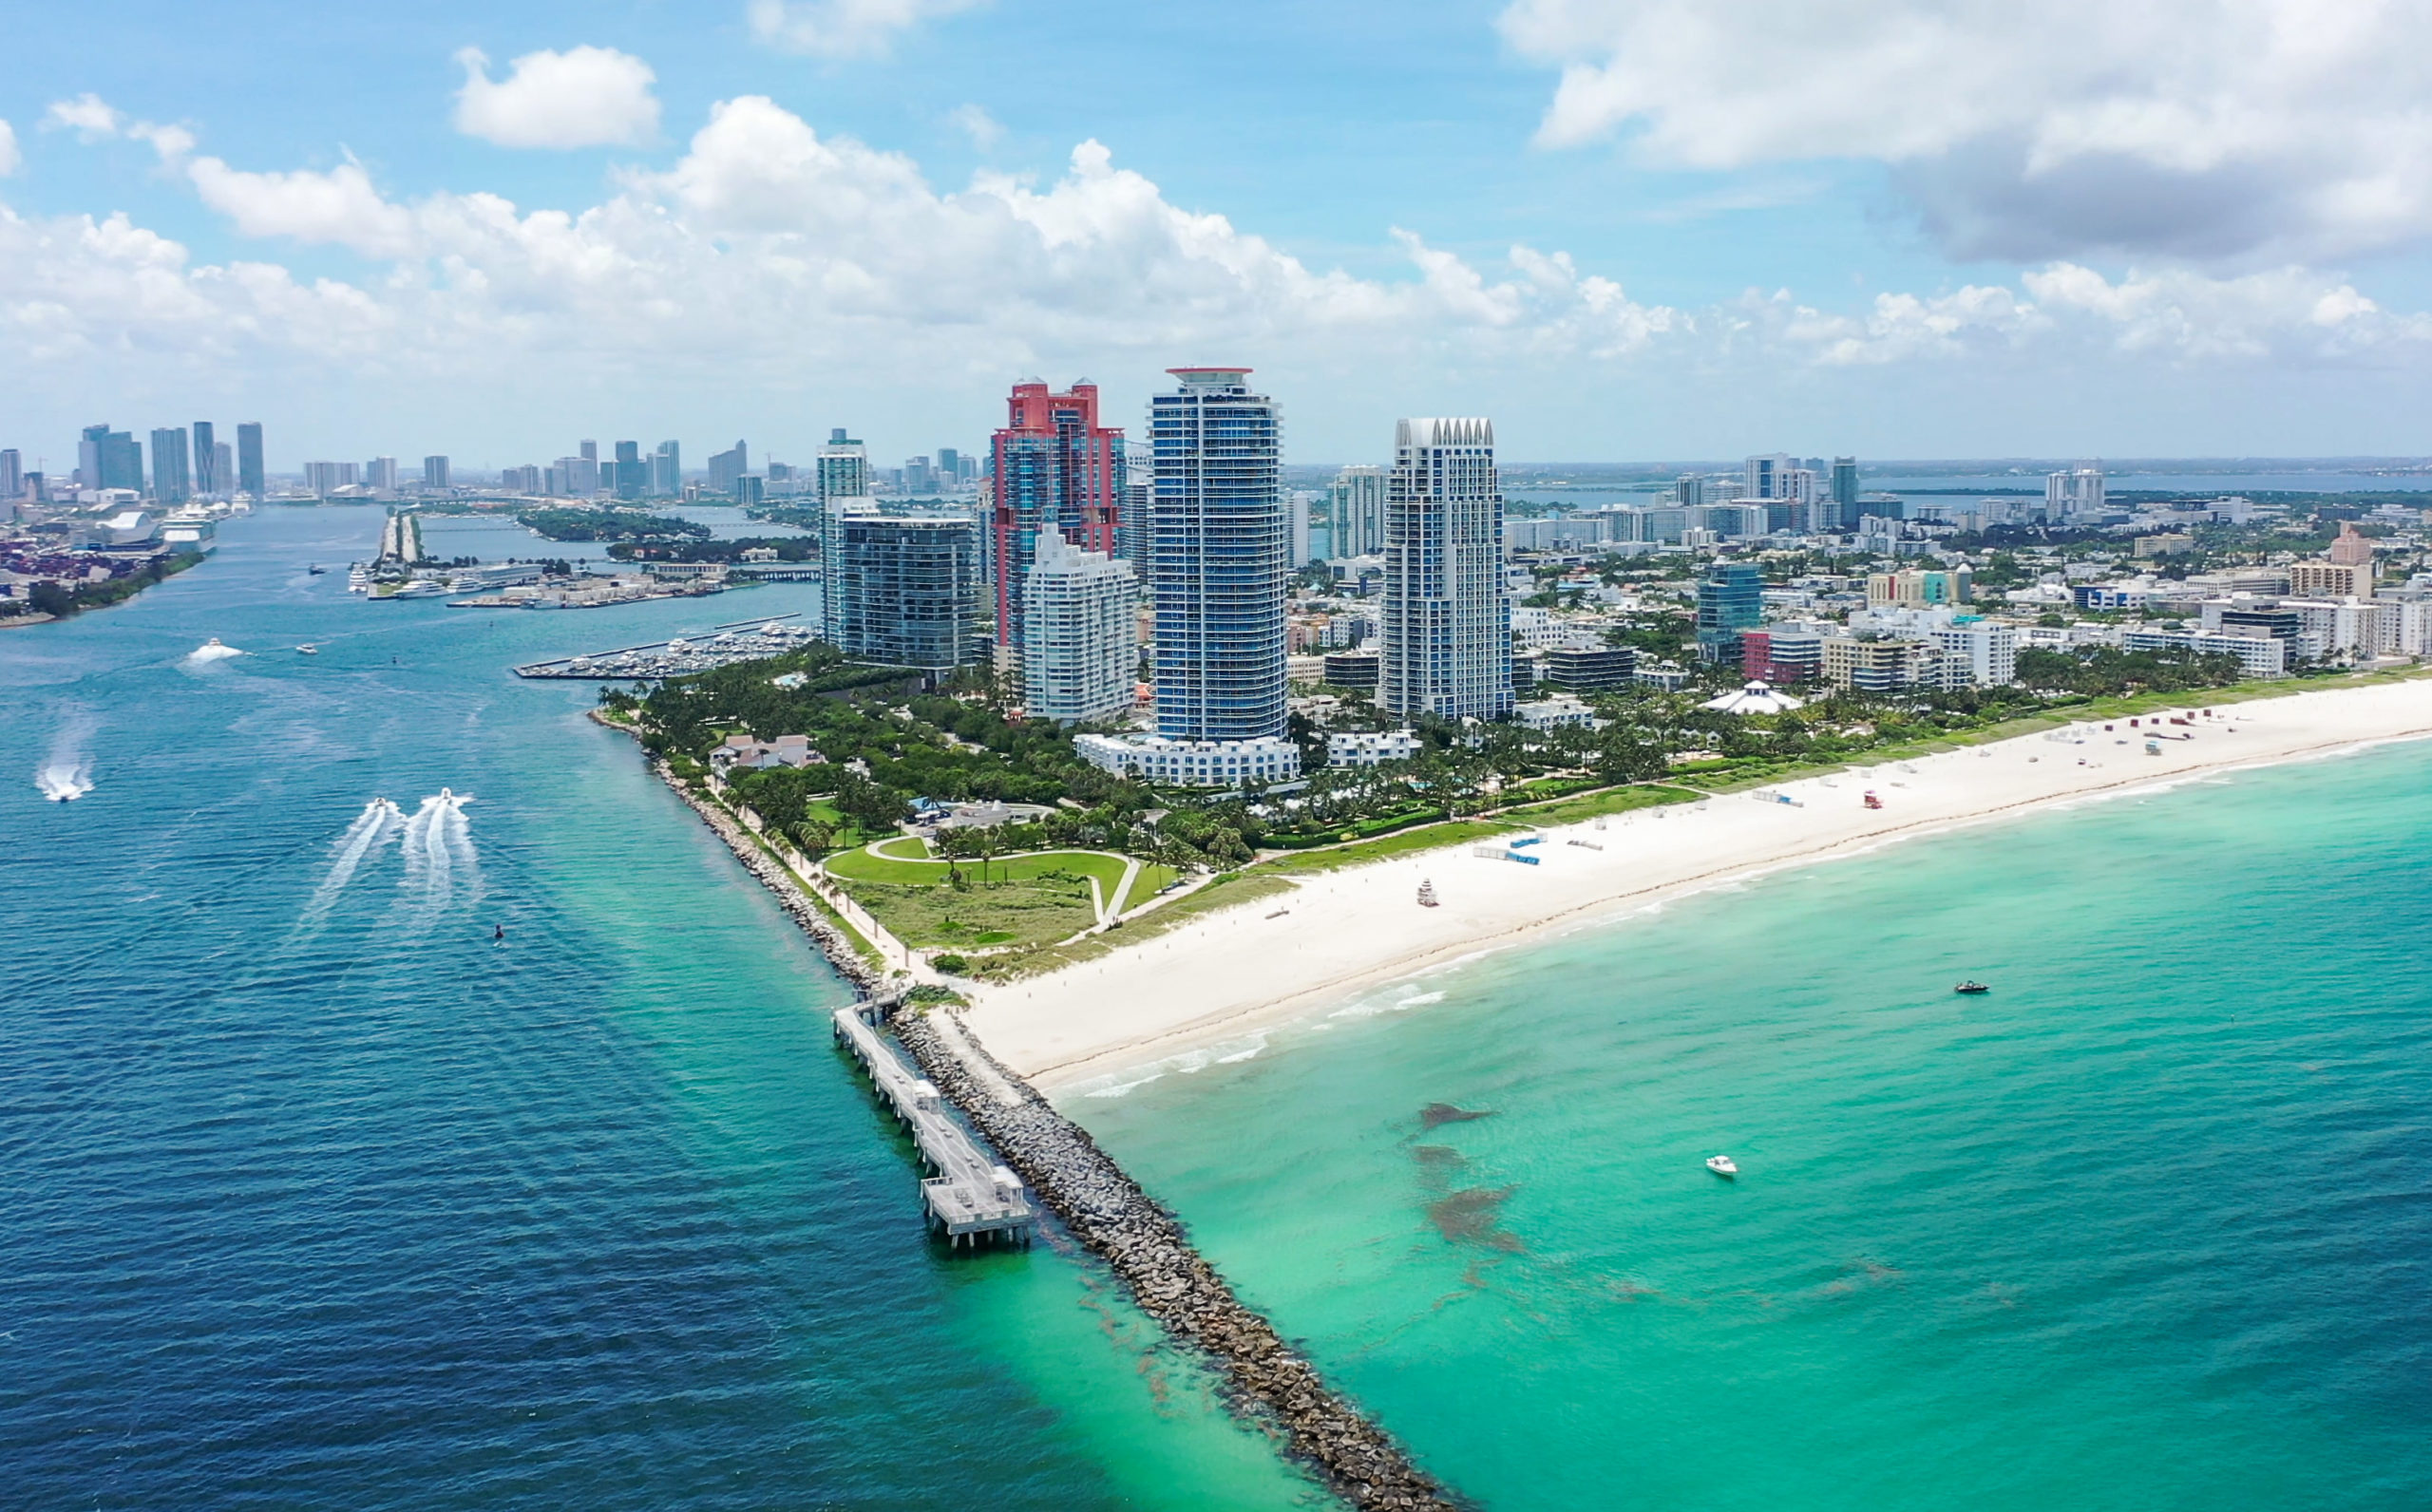 Continuum Miami Beach Units for Sale | The Best Continuum Unit for Sale in August 2019